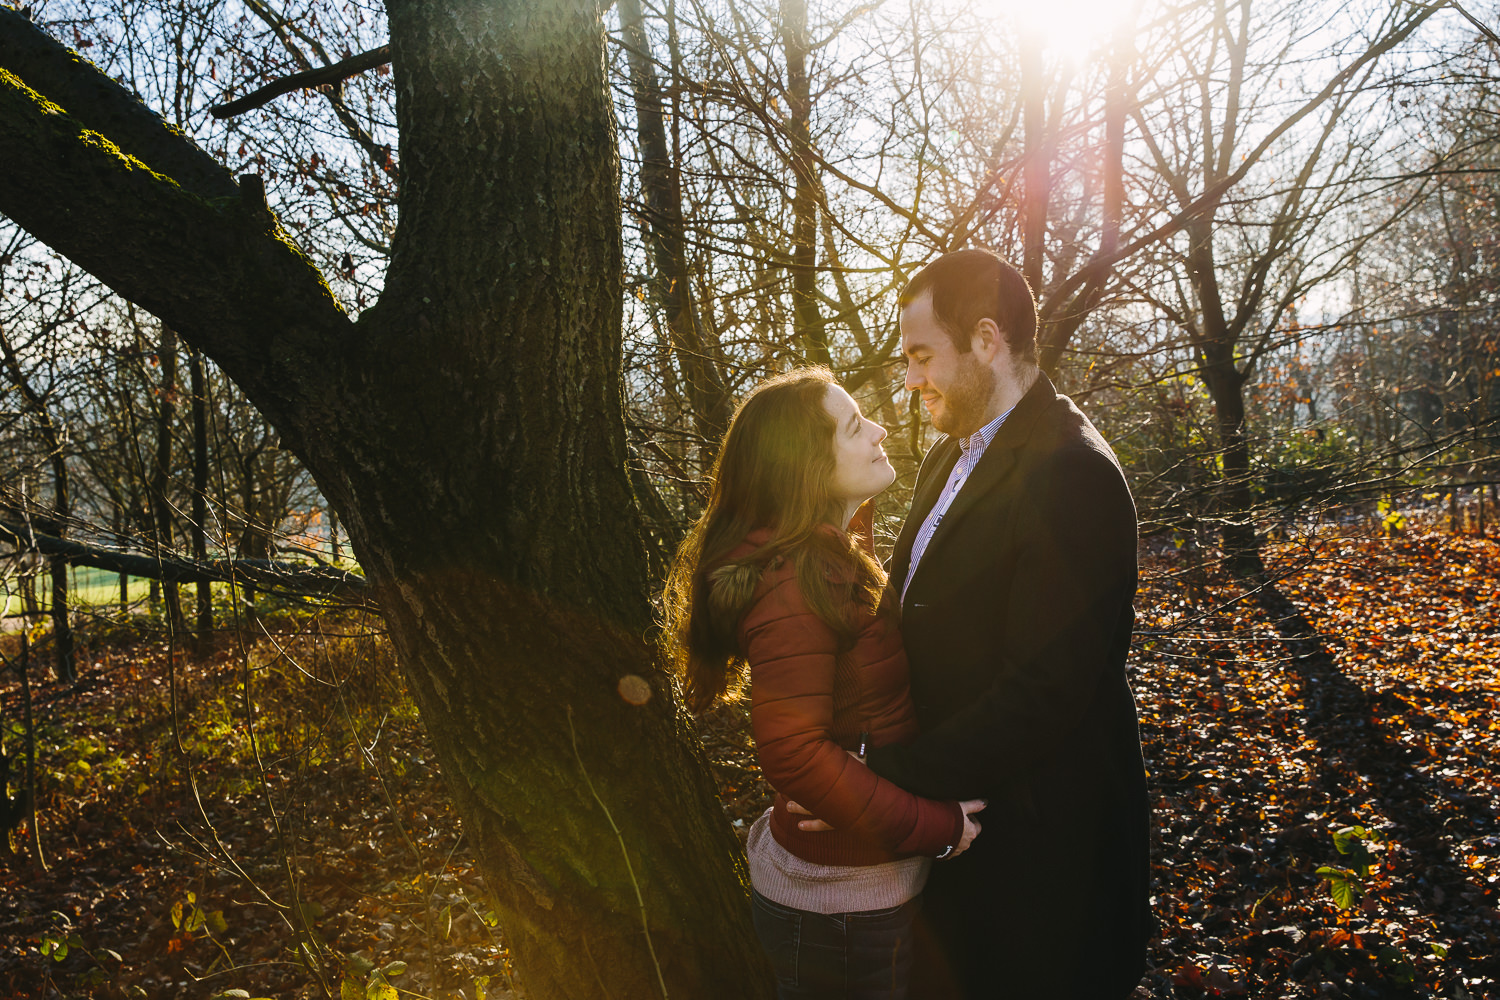 ENgagement shoot photo of couple smiling at each other, with low sunlight shining behind them. They are surround by trees and smiling at one another.